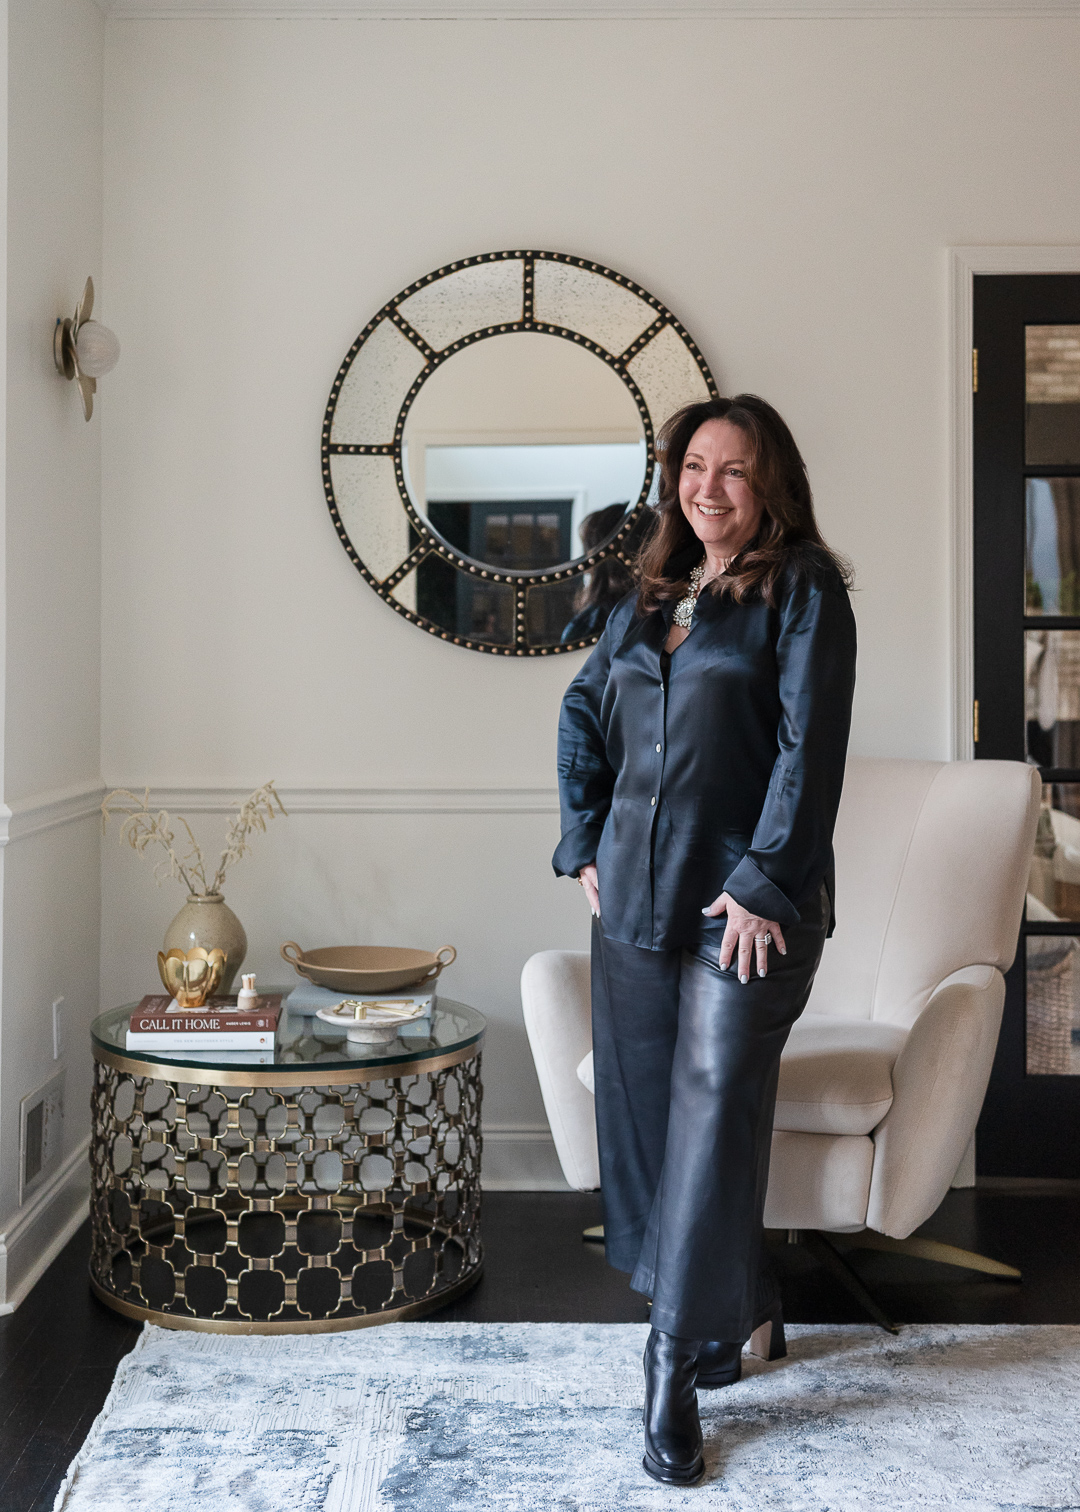 Learn the Six S's of Success to get published as an interior designer with Tori Sikkema as she speaks at Universal's Learning Center at High Point Market in NC.